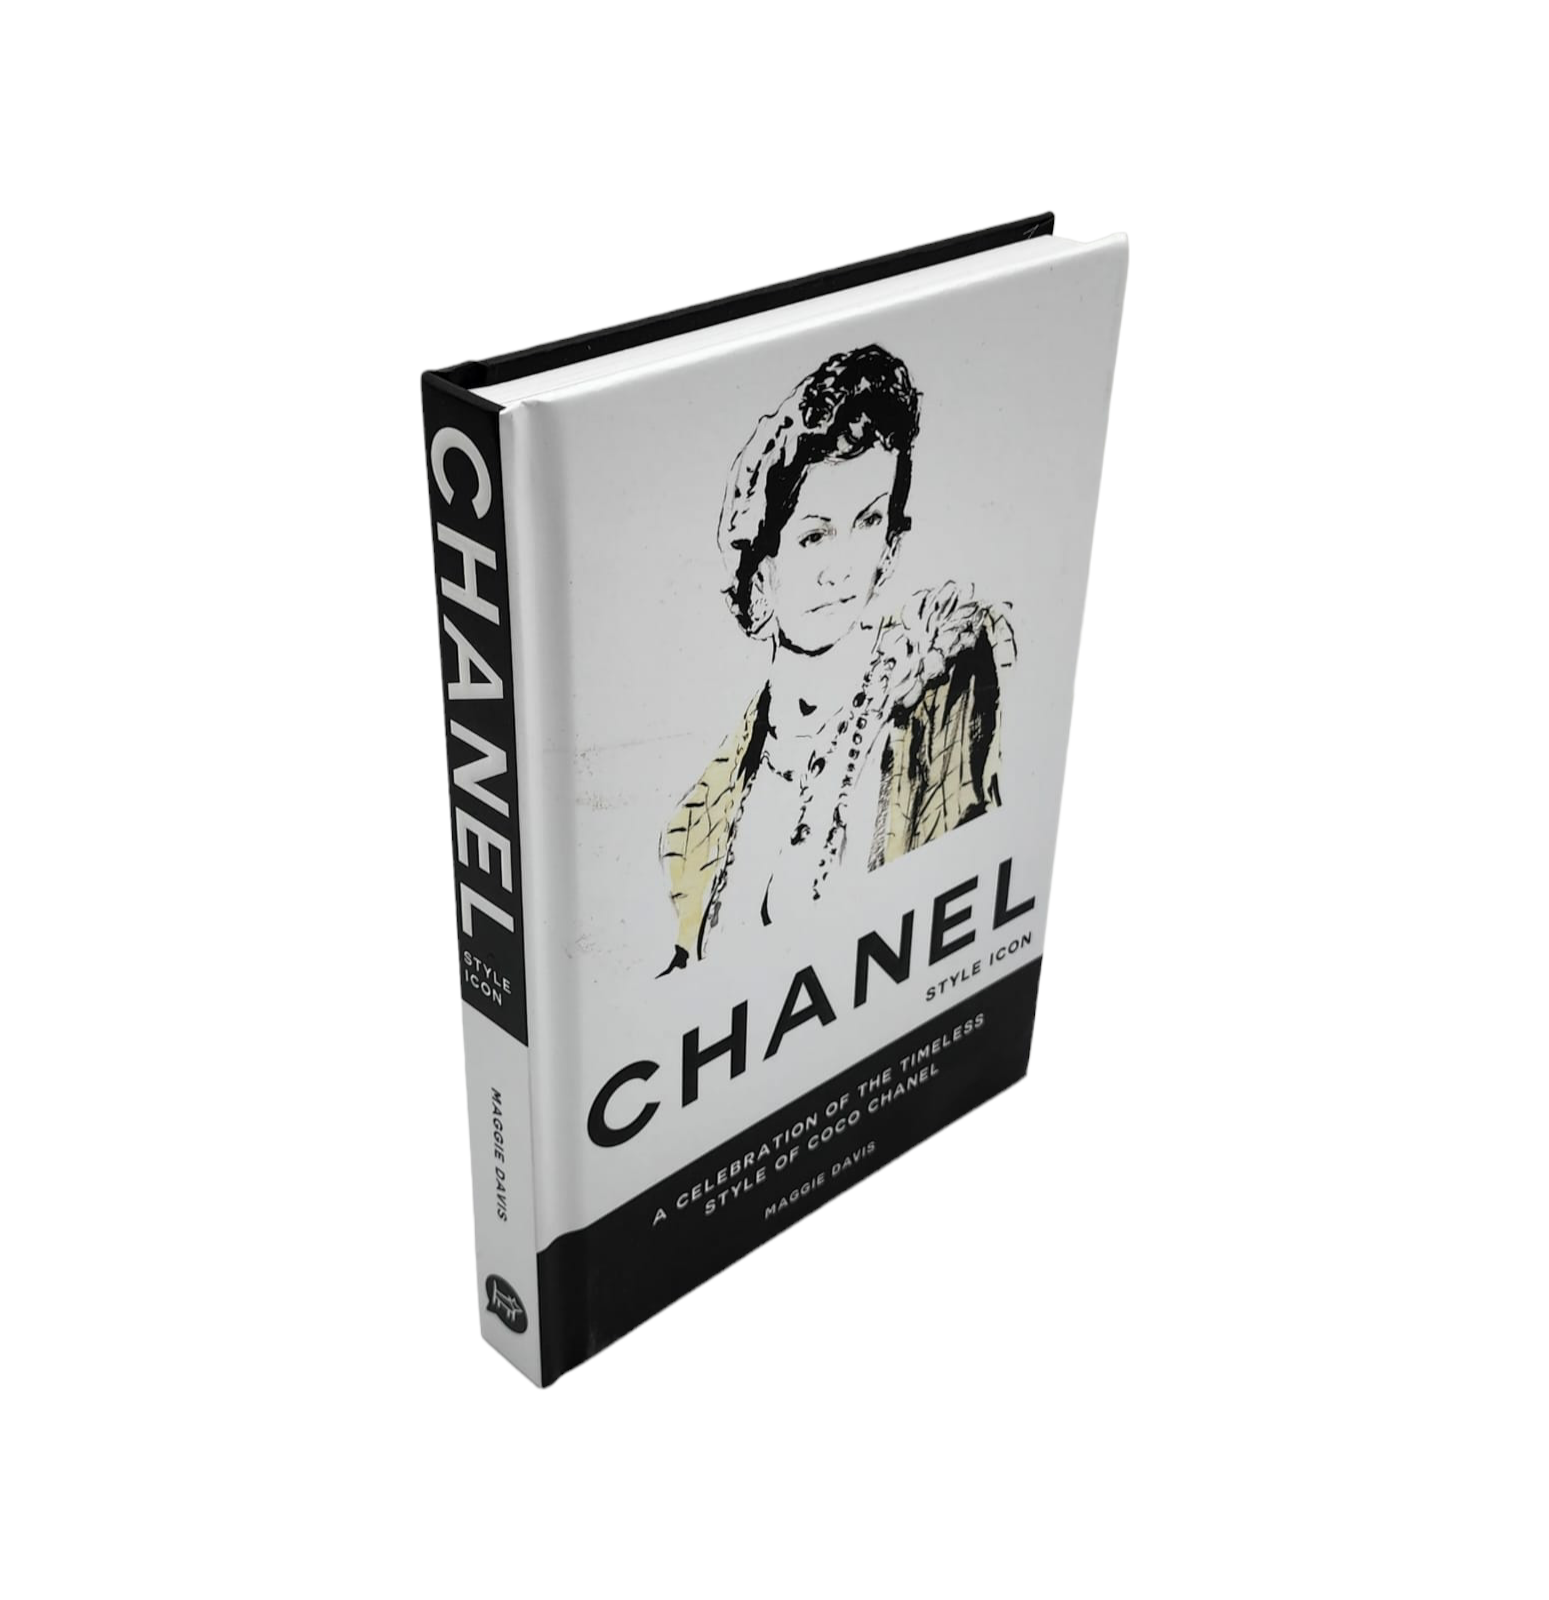 Coco Chanel: Style Icon - By Maggie Davis (hardcover) : Target